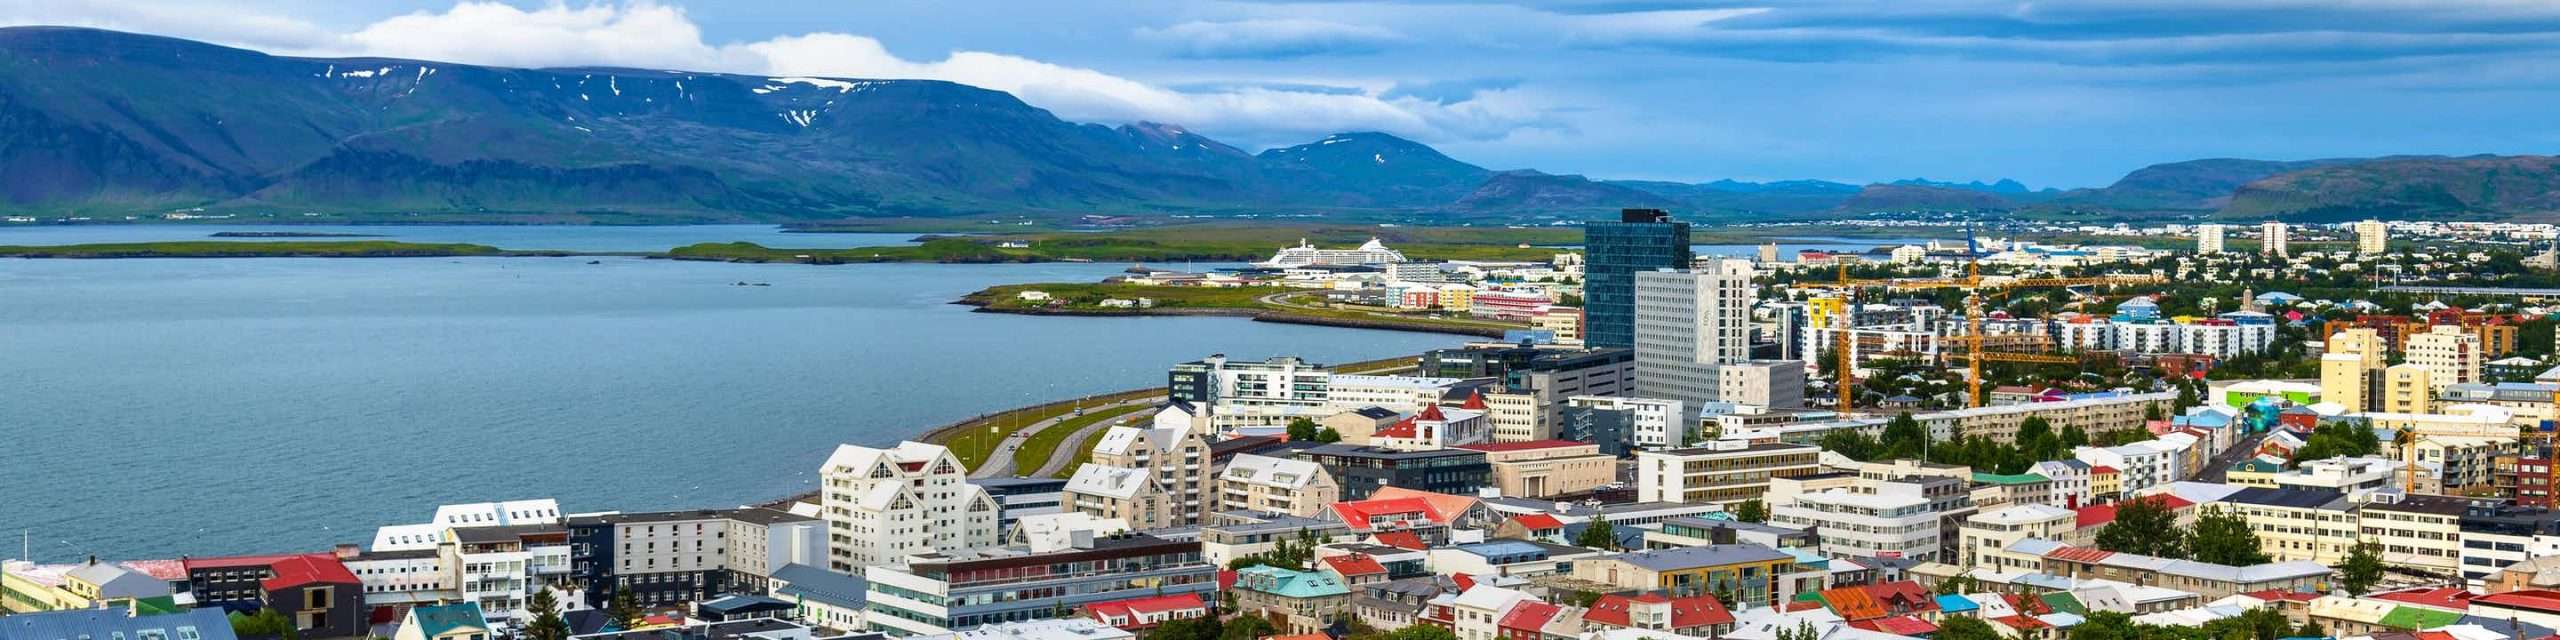 THE 25 BEST Cruises to Reykjavik 2021 (with Prices ...